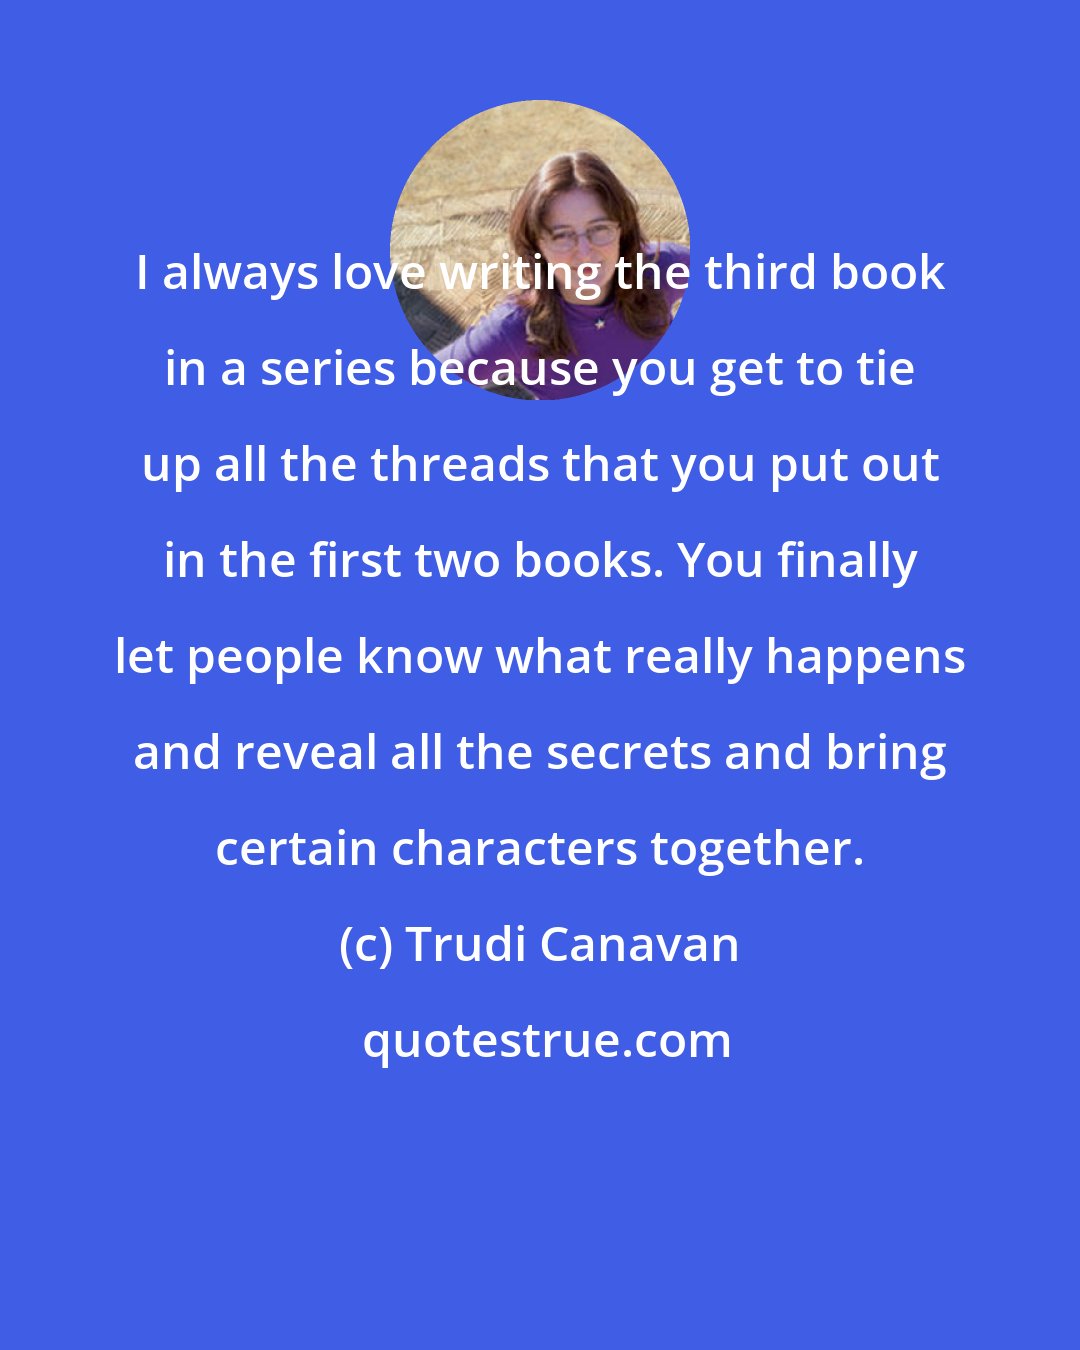 Trudi Canavan: I always love writing the third book in a series because you get to tie up all the threads that you put out in the first two books. You finally let people know what really happens and reveal all the secrets and bring certain characters together.